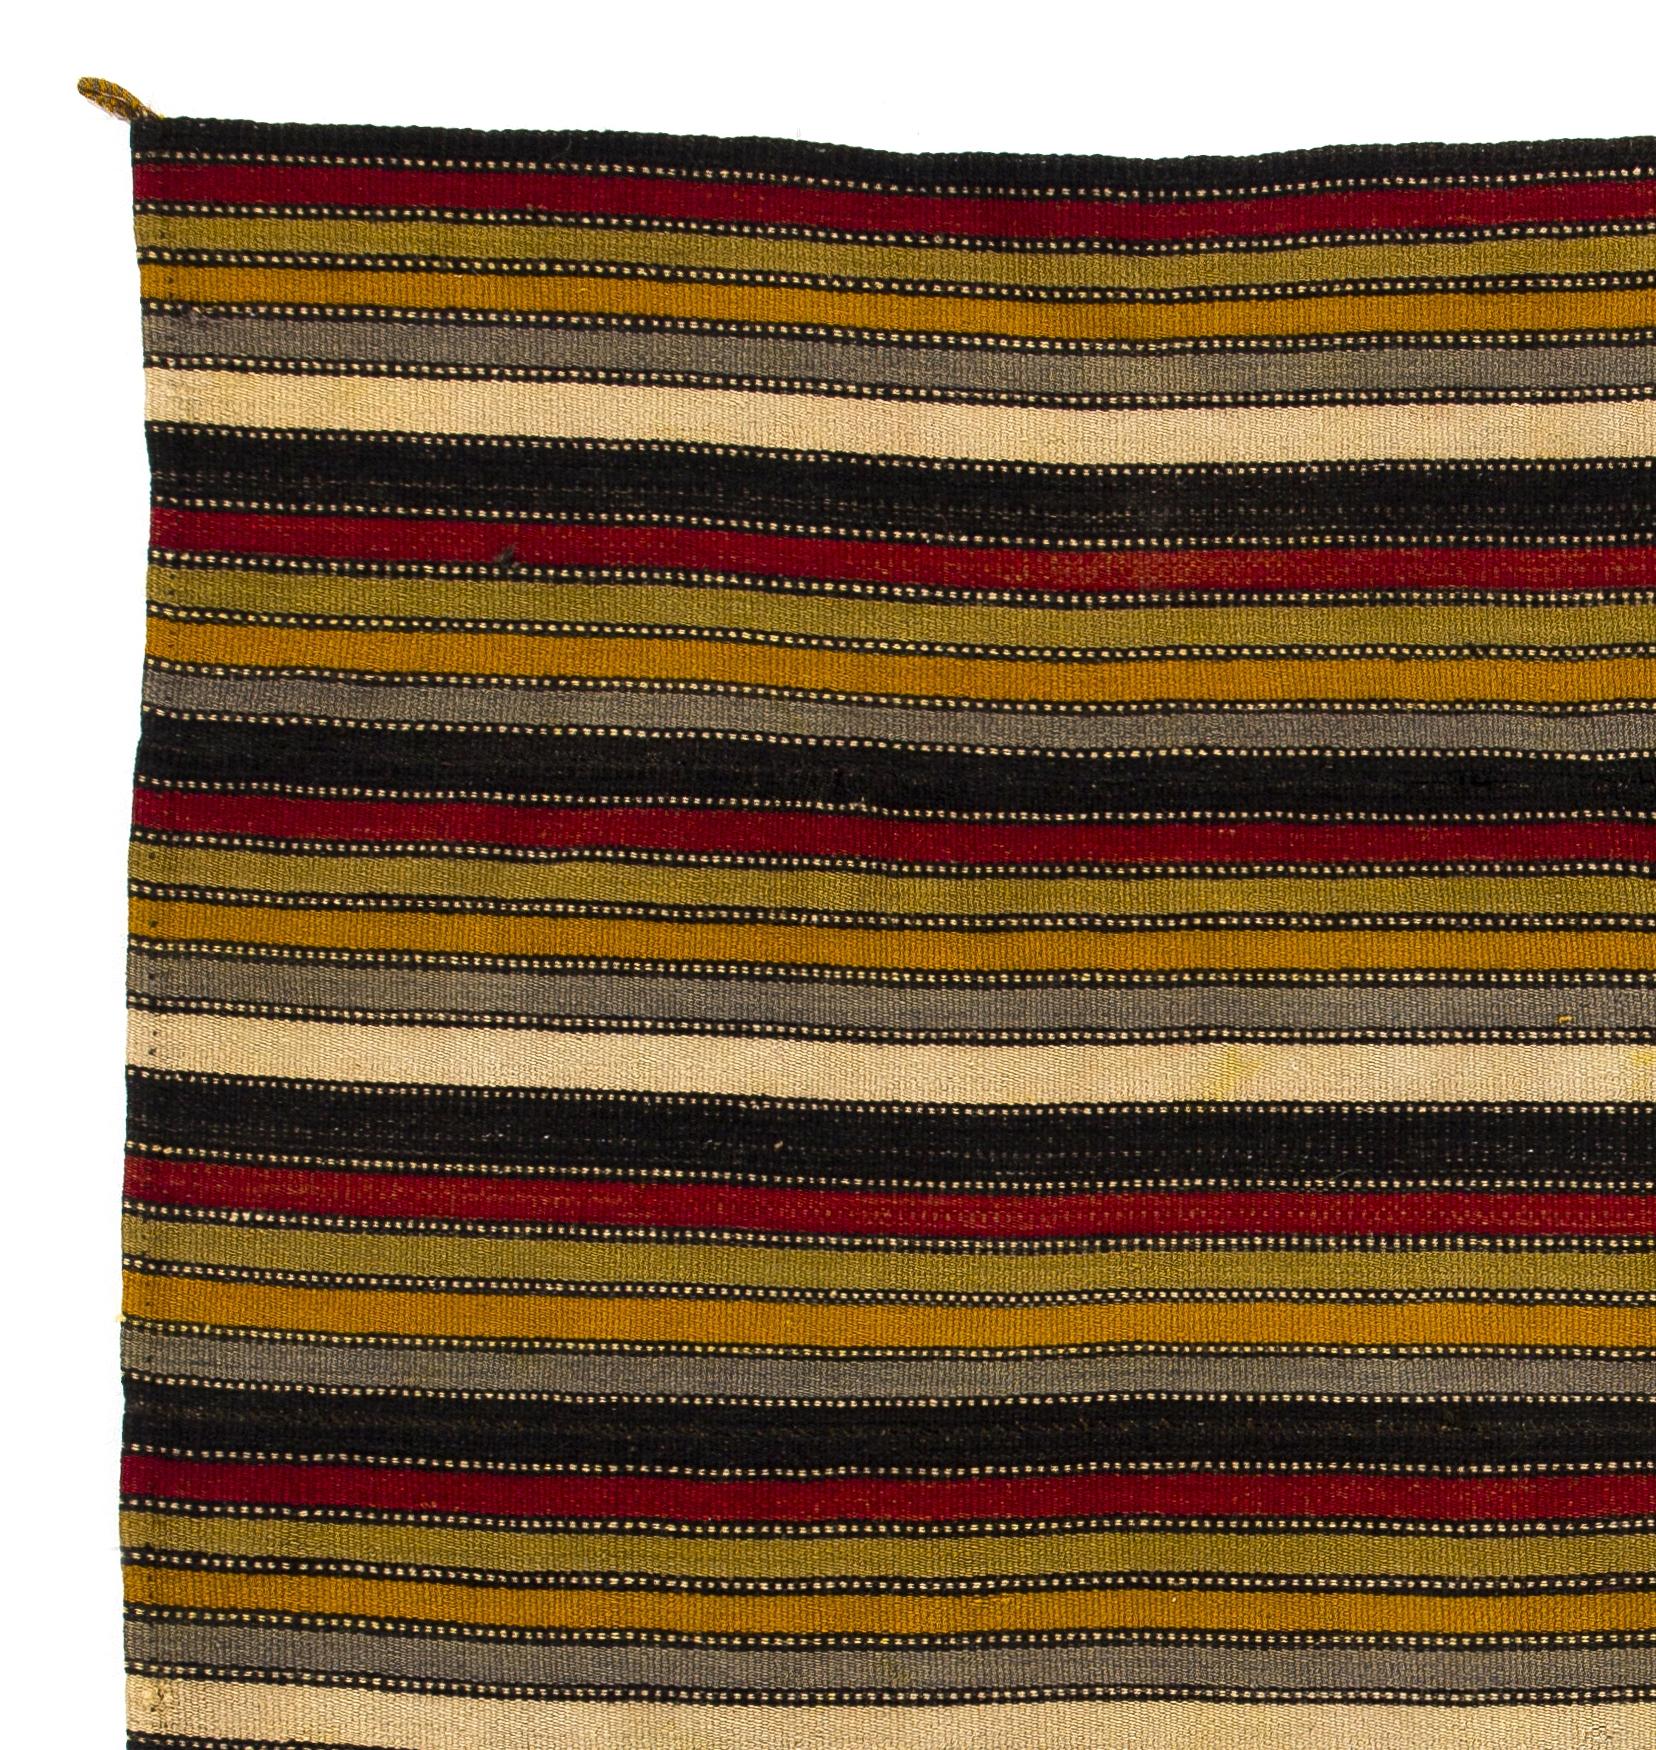 5.7x5.9 Ft Handwoven Striped Vintage Anatolian Kilim, Flat-weave Rug, 100% Wool In Good Condition For Sale In Philadelphia, PA